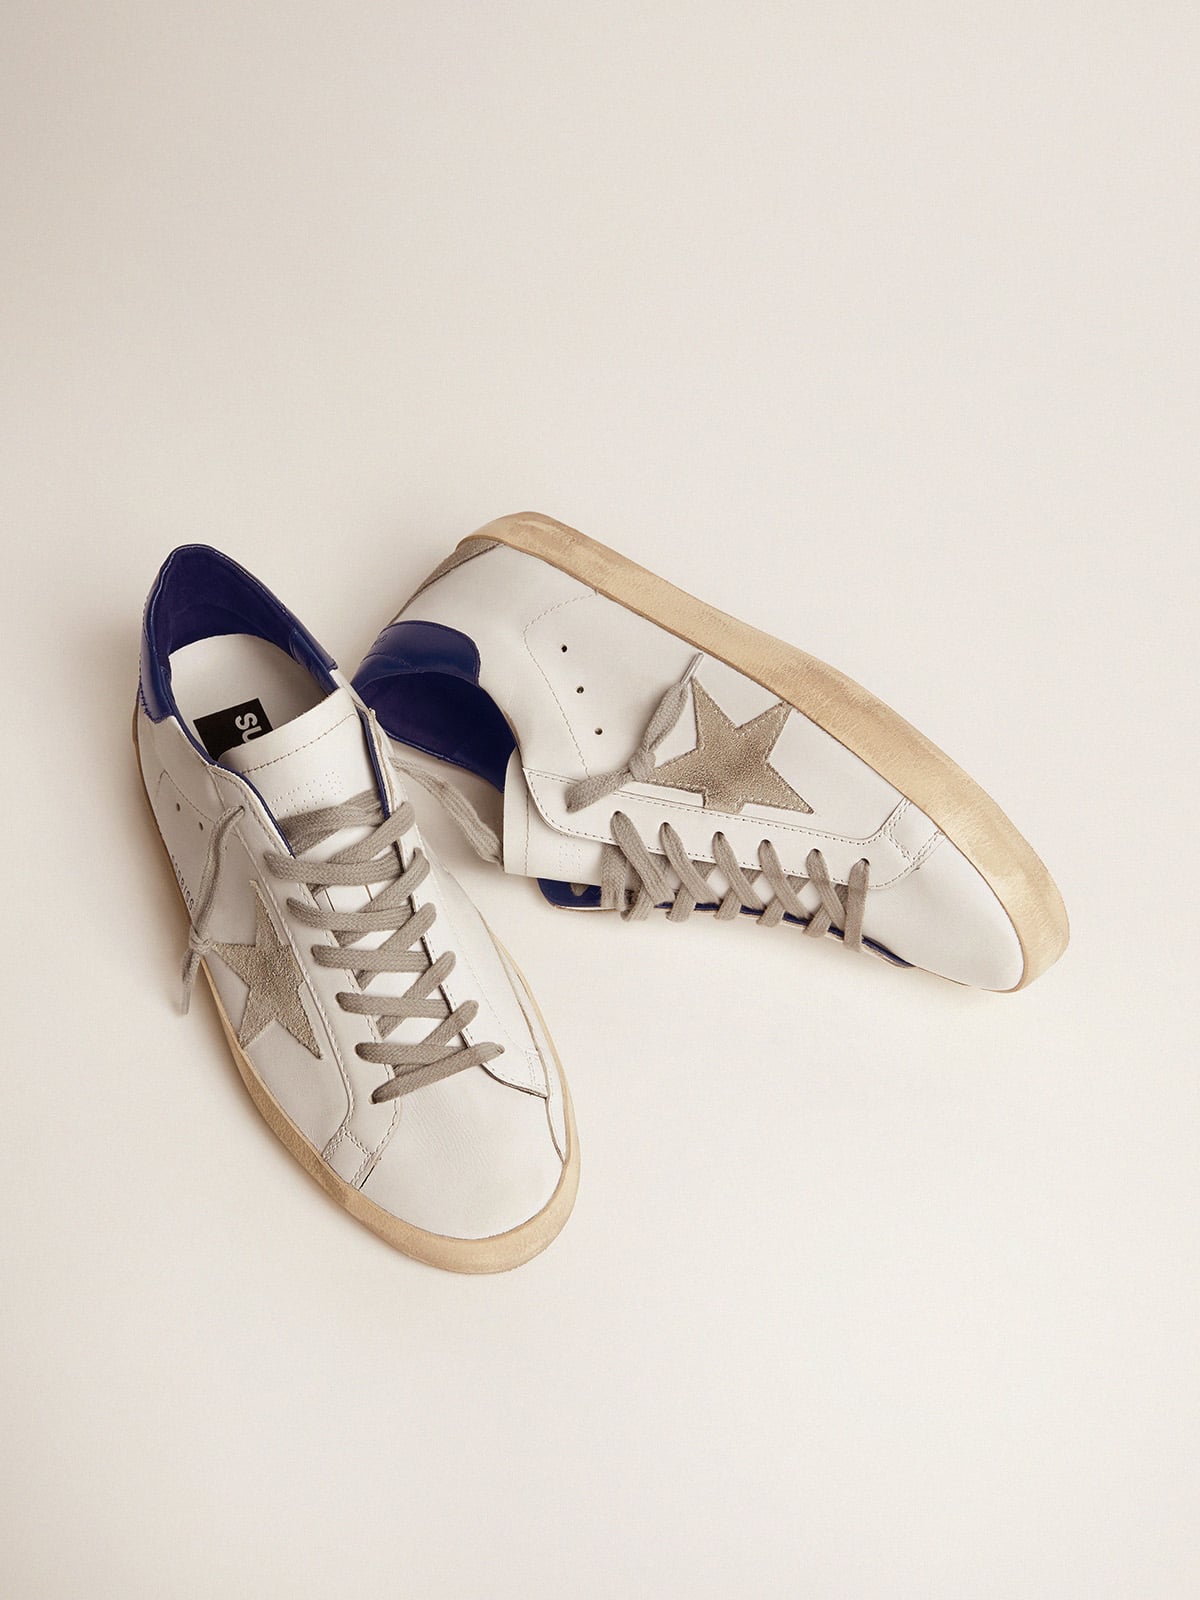 Women's Super-Star with suede star and blue heel tab